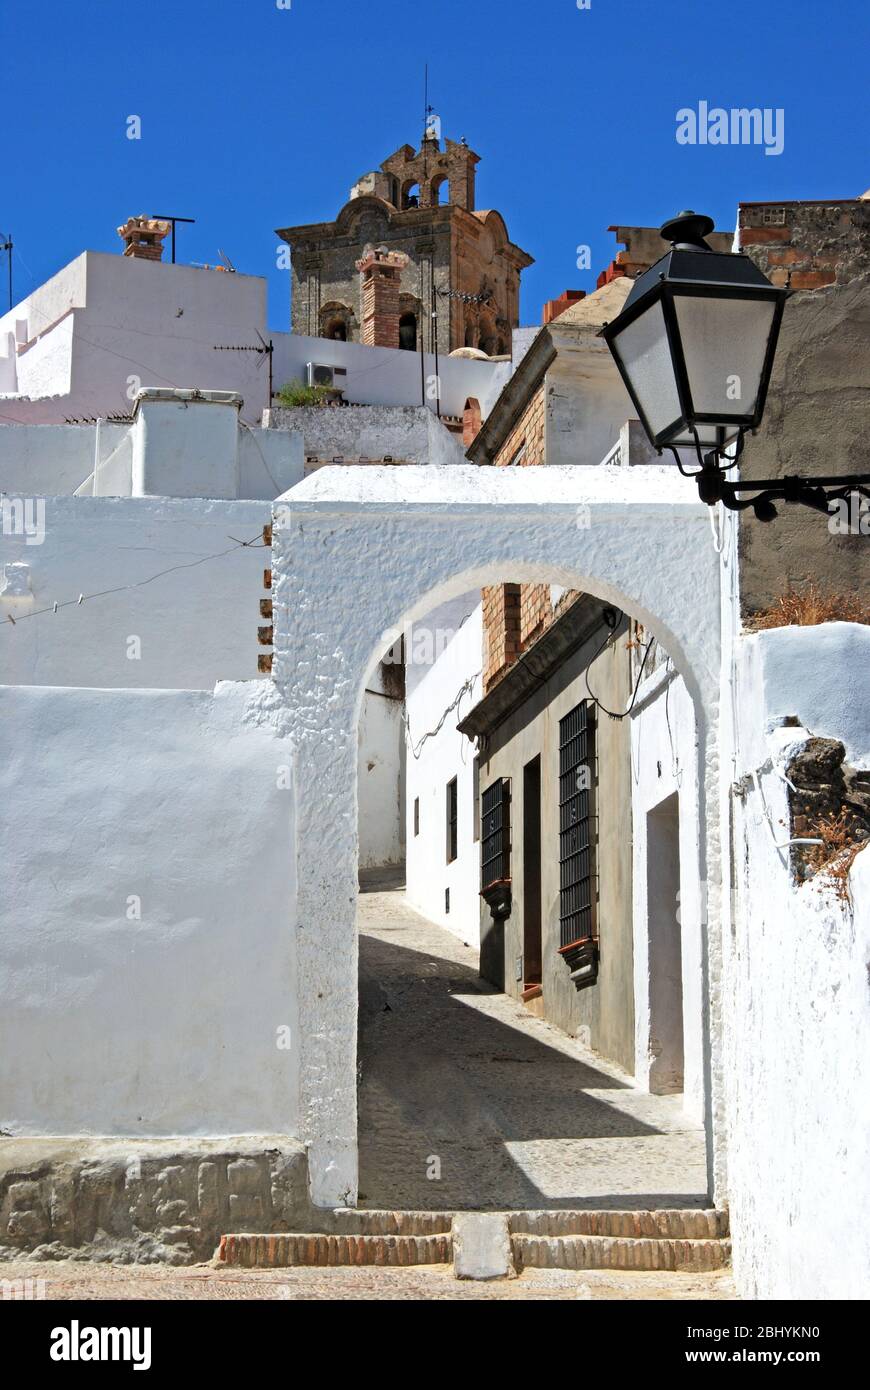 Whitewashed buildings in front of the Iglesia de San Pedro (St Peters Church), Arcos de la Frontera, Andalucia, Spain. Stock Photo